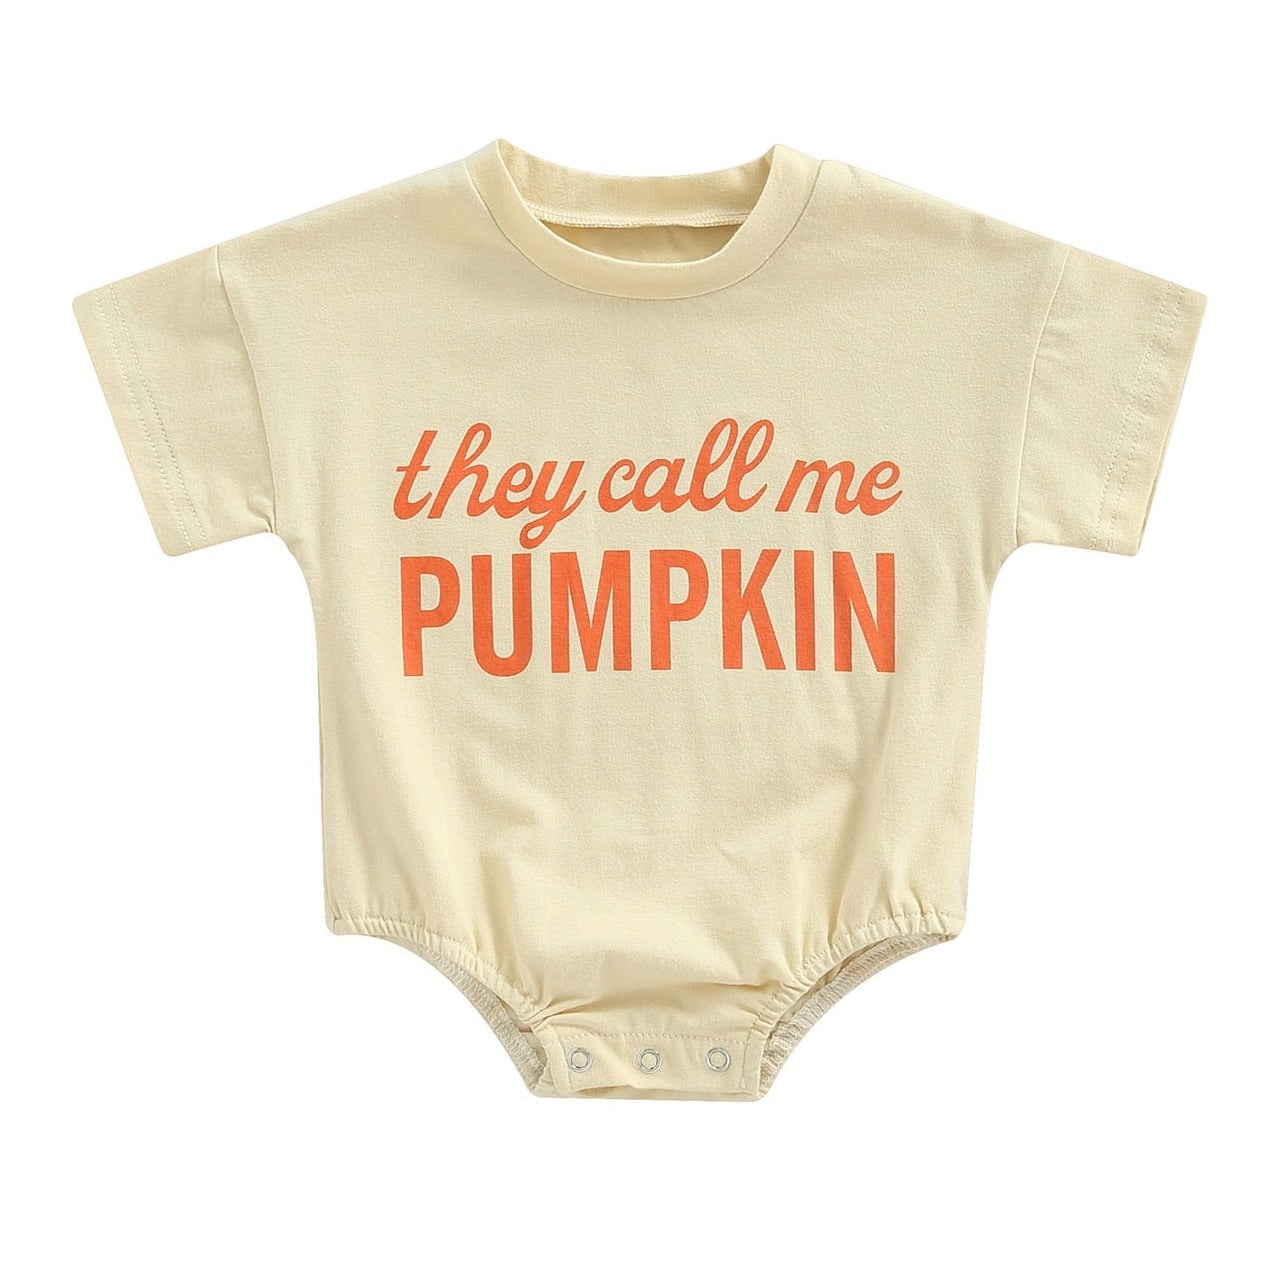 they call me pumpkin baby outfit